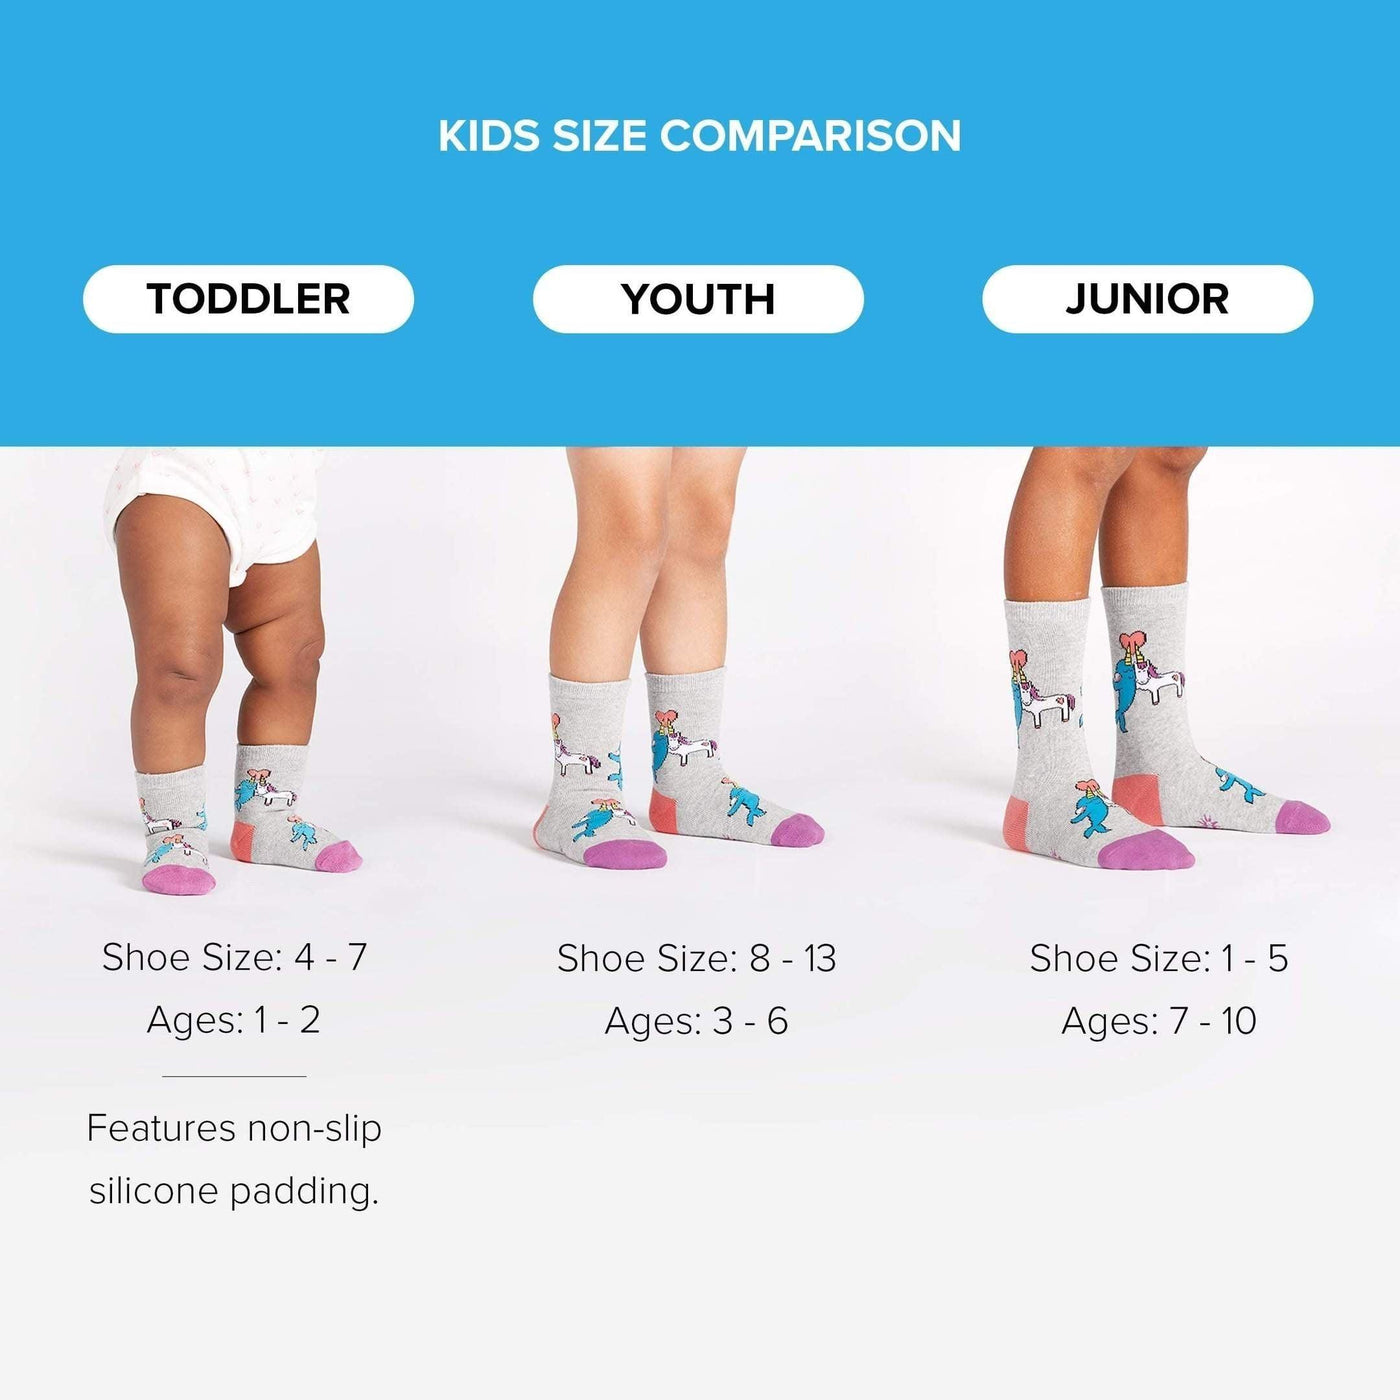 Keep On Paddling, Youth Knee-high - Sock It To Me - The Sock Monster